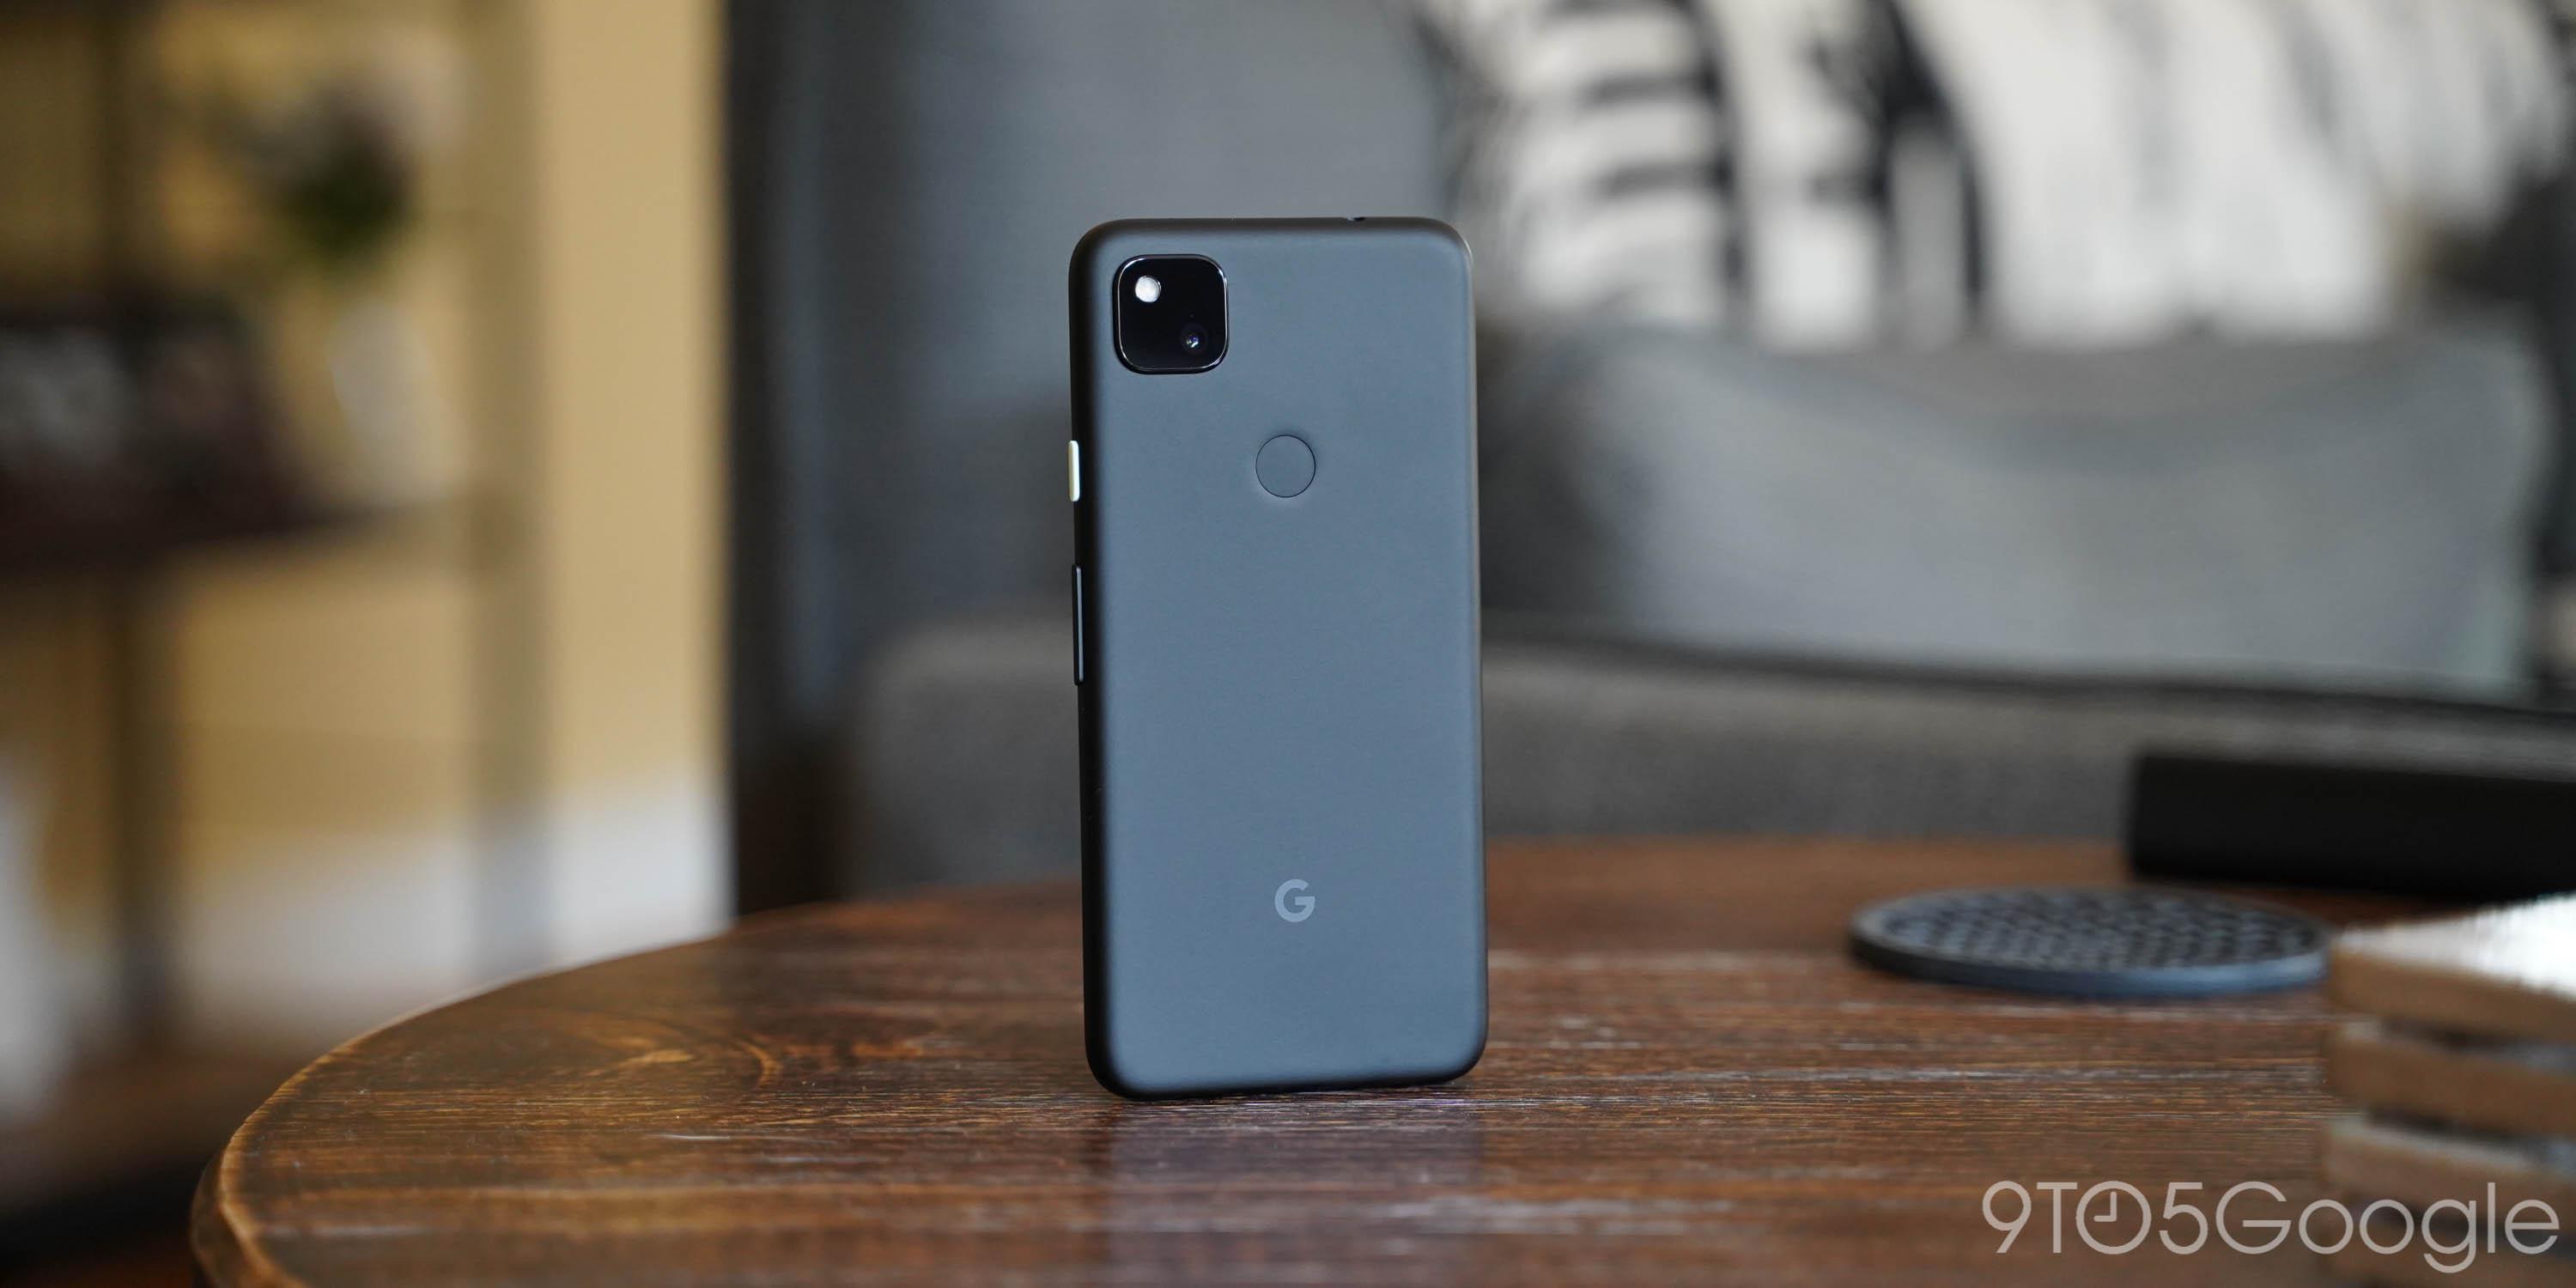 Pixel 4a Review: Superb smartphone on a budget - 9to5Google